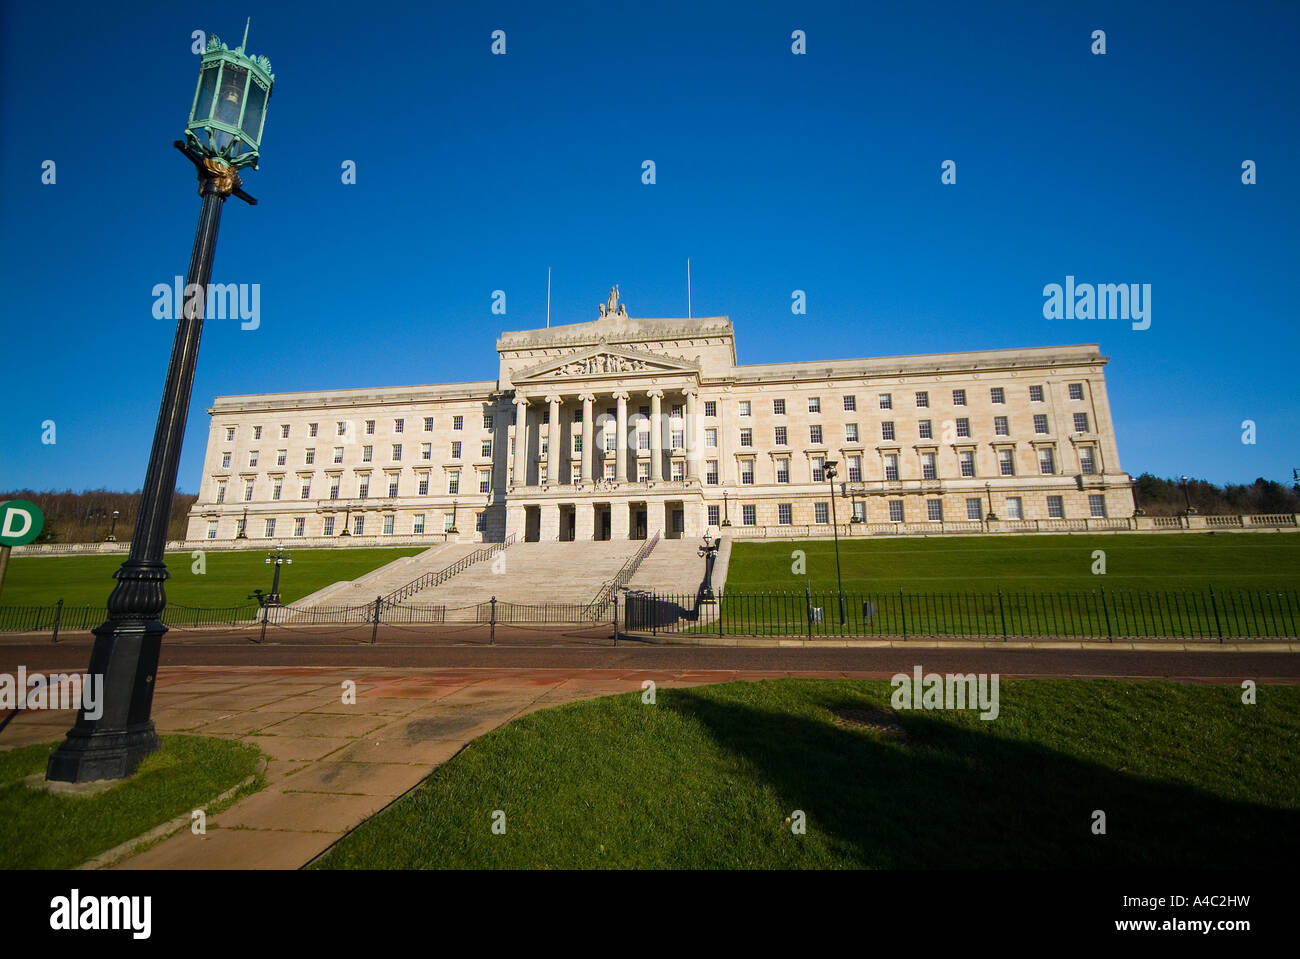 Stormont Belfast seat of Northern Ireland assembly Stock Photo